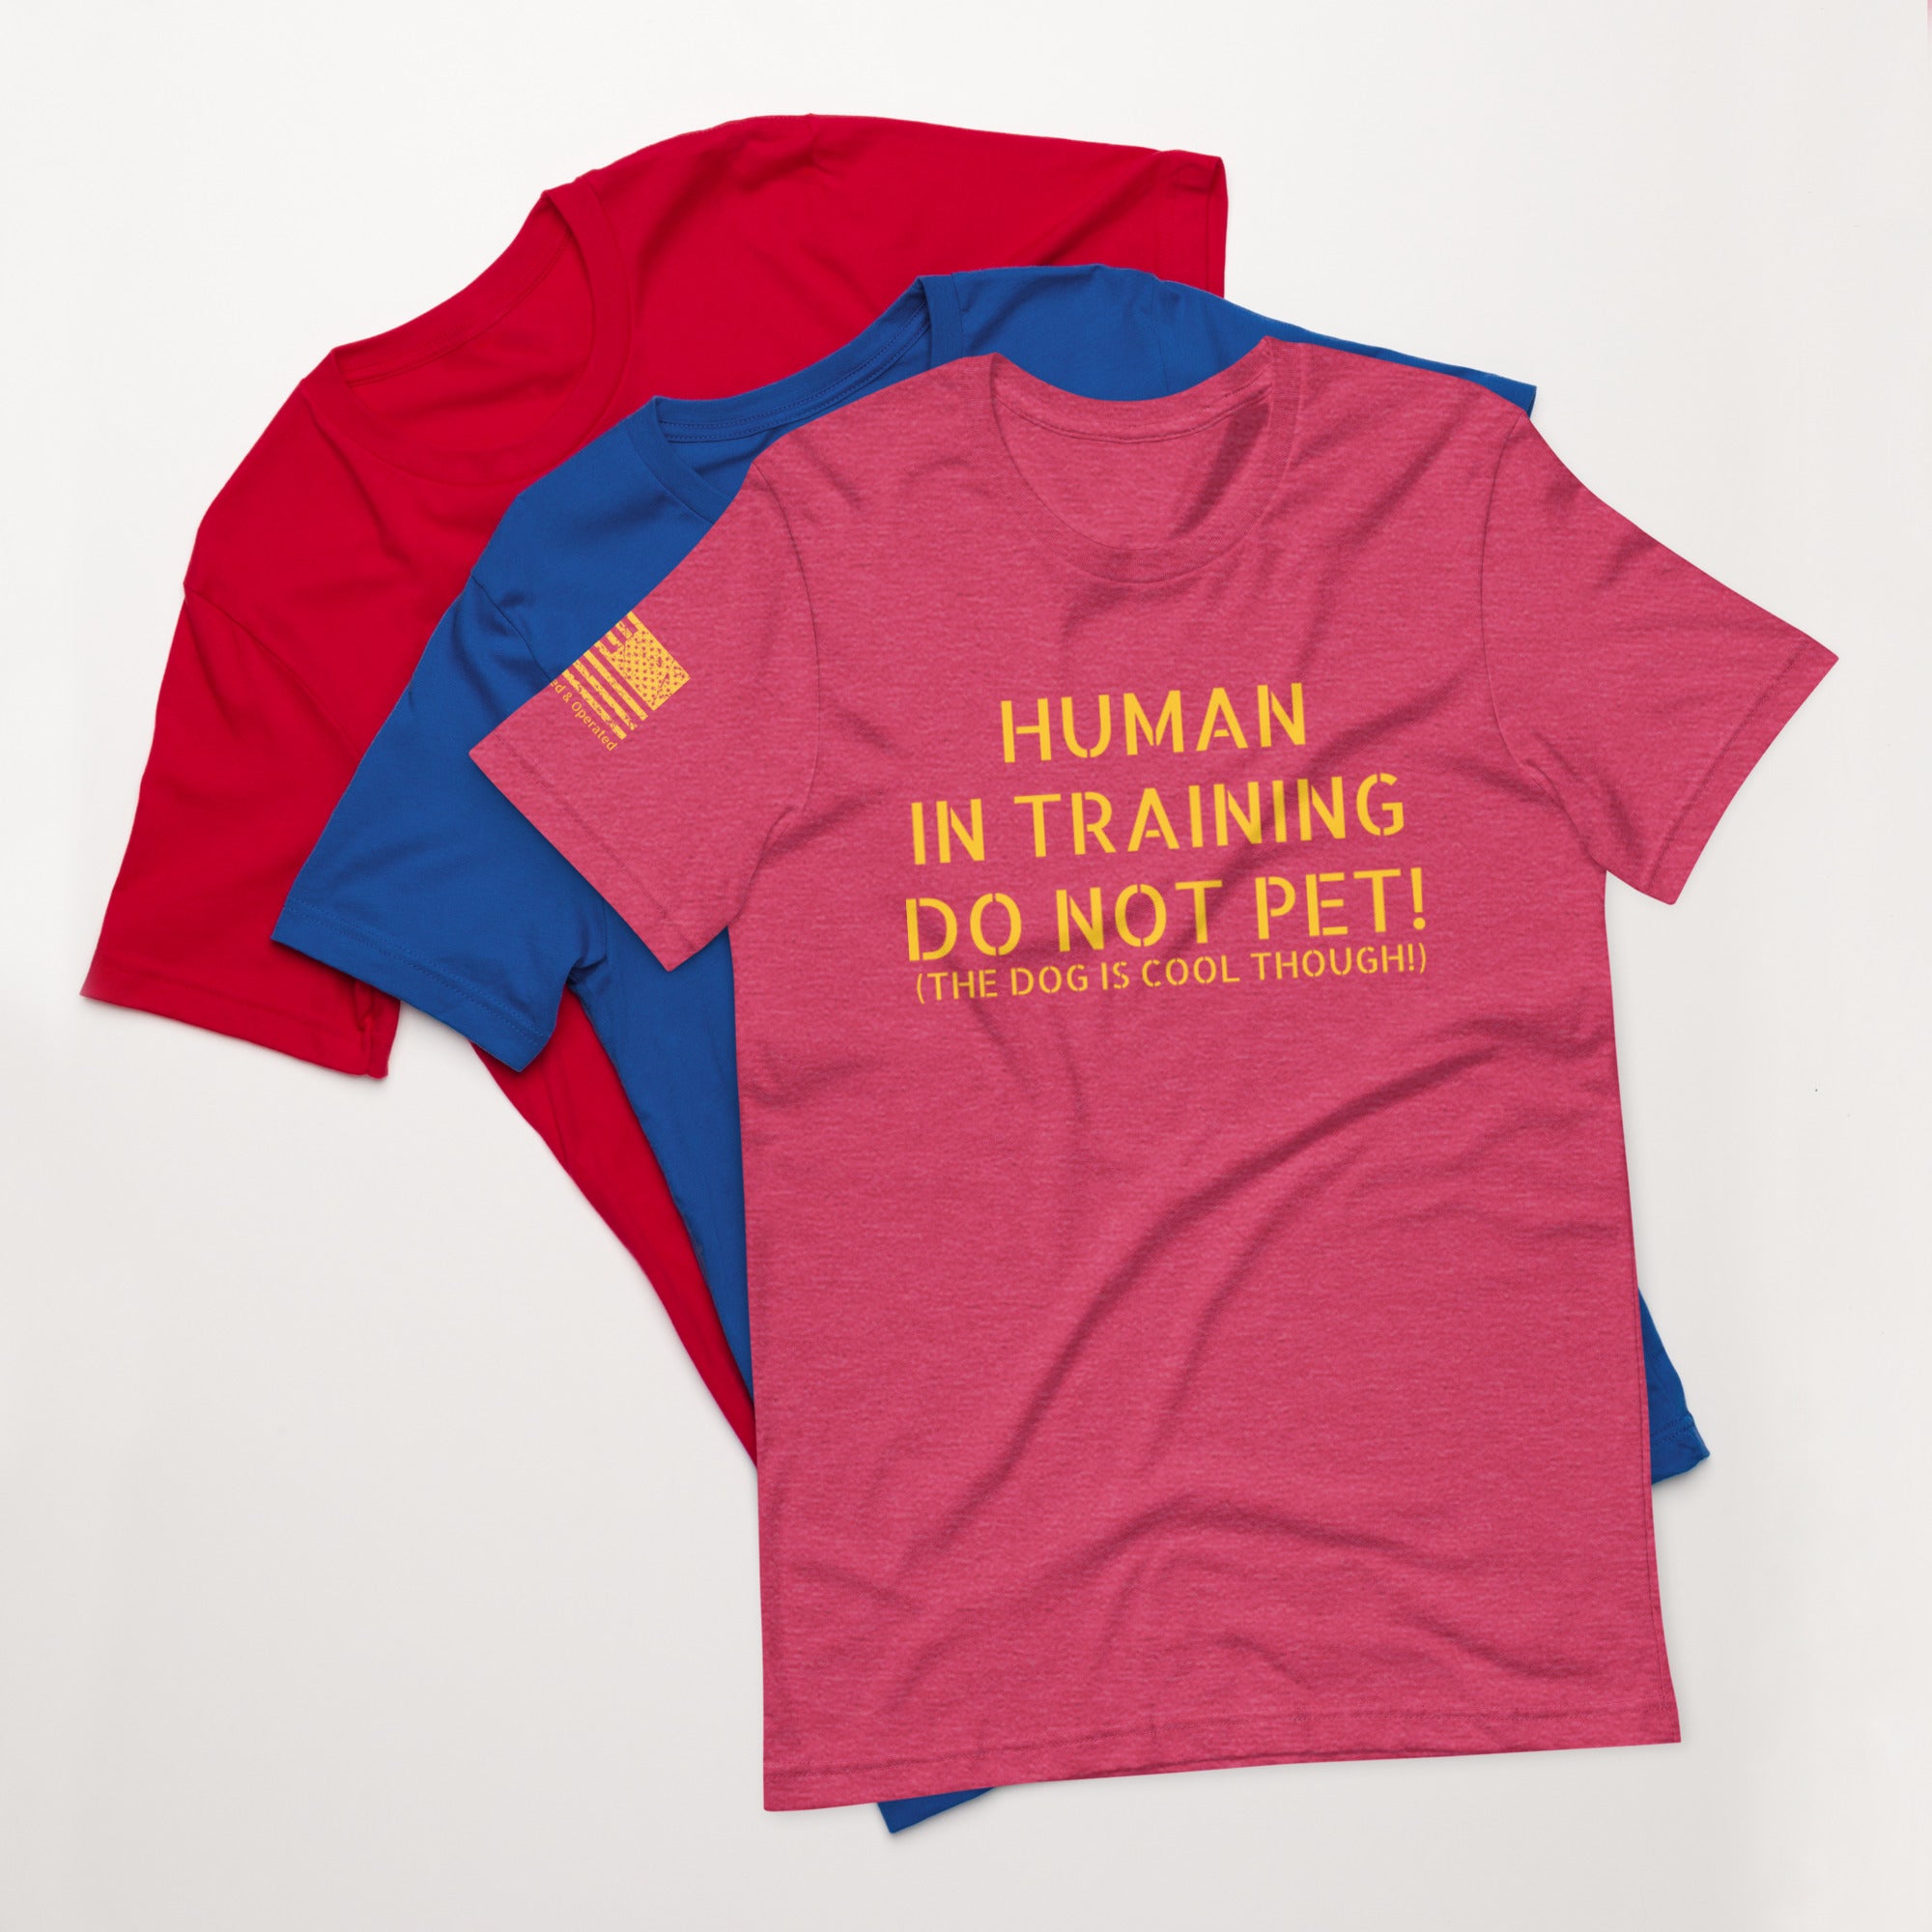 Unisex t-shirt HUMAN IN TRAINING DO NOT PET! (BUT THE DOG IS COOL)